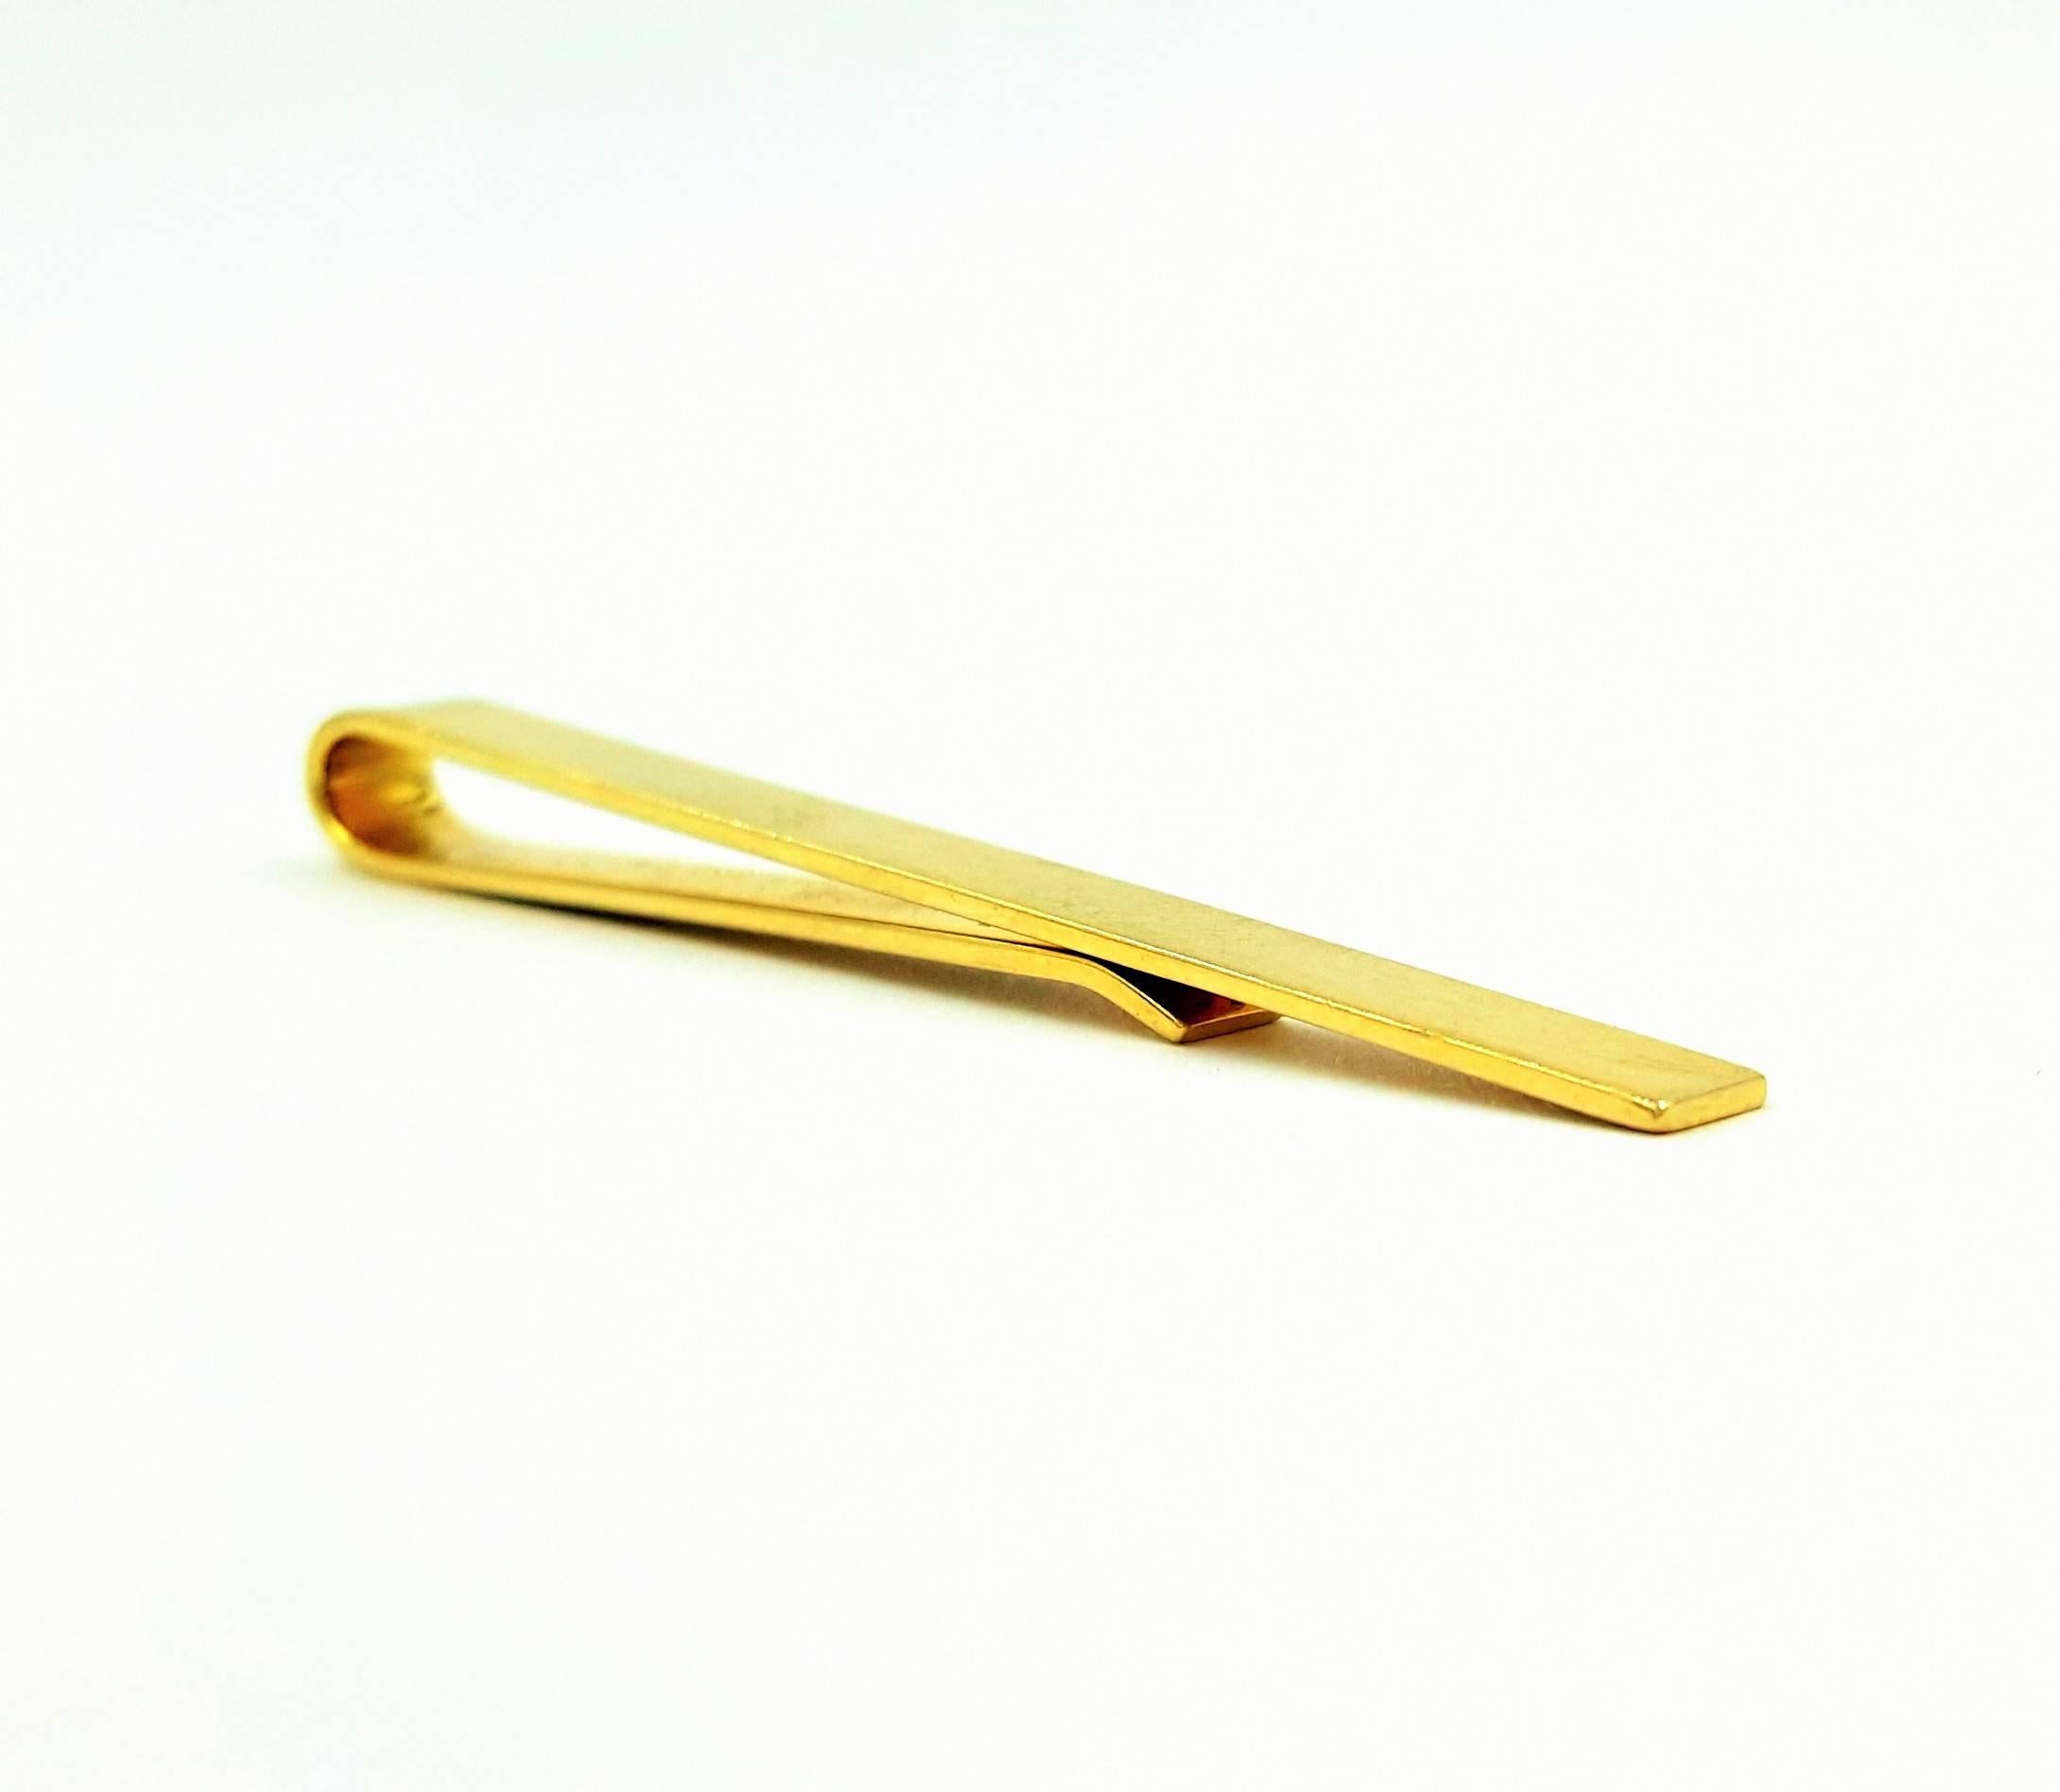 This sharp and classic Tiffany & Co. clip can be used either as your billfold or your tie clip or both! This piece weighs 5 grams and is 2 inches in length by .25 inches in width and caries correct 